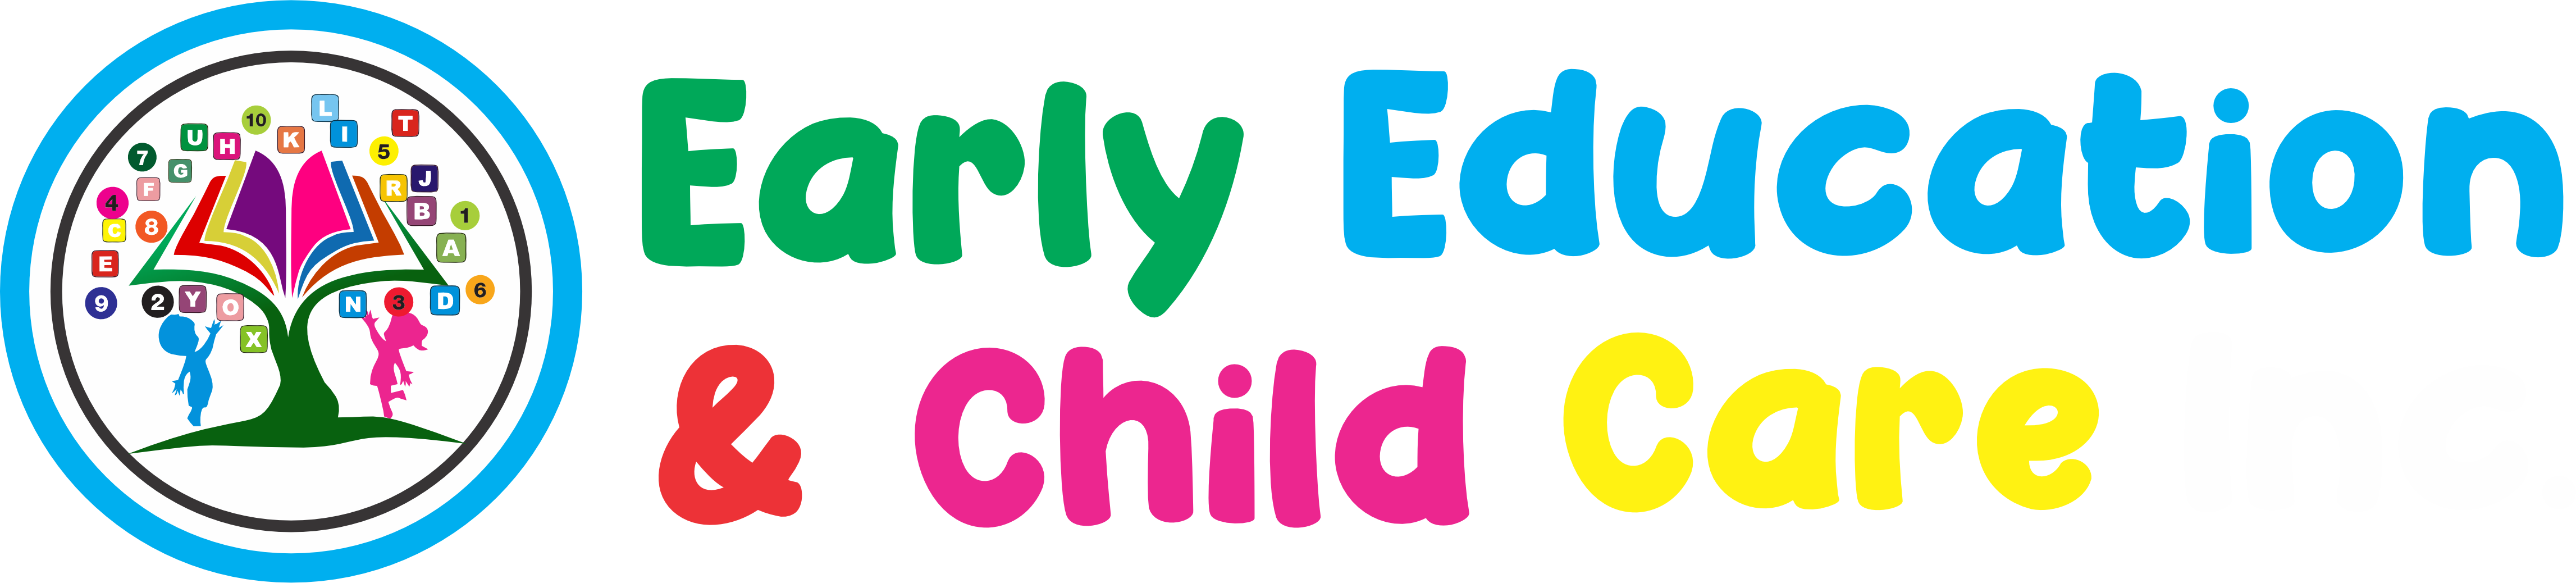 Early Education Child Care Inc.